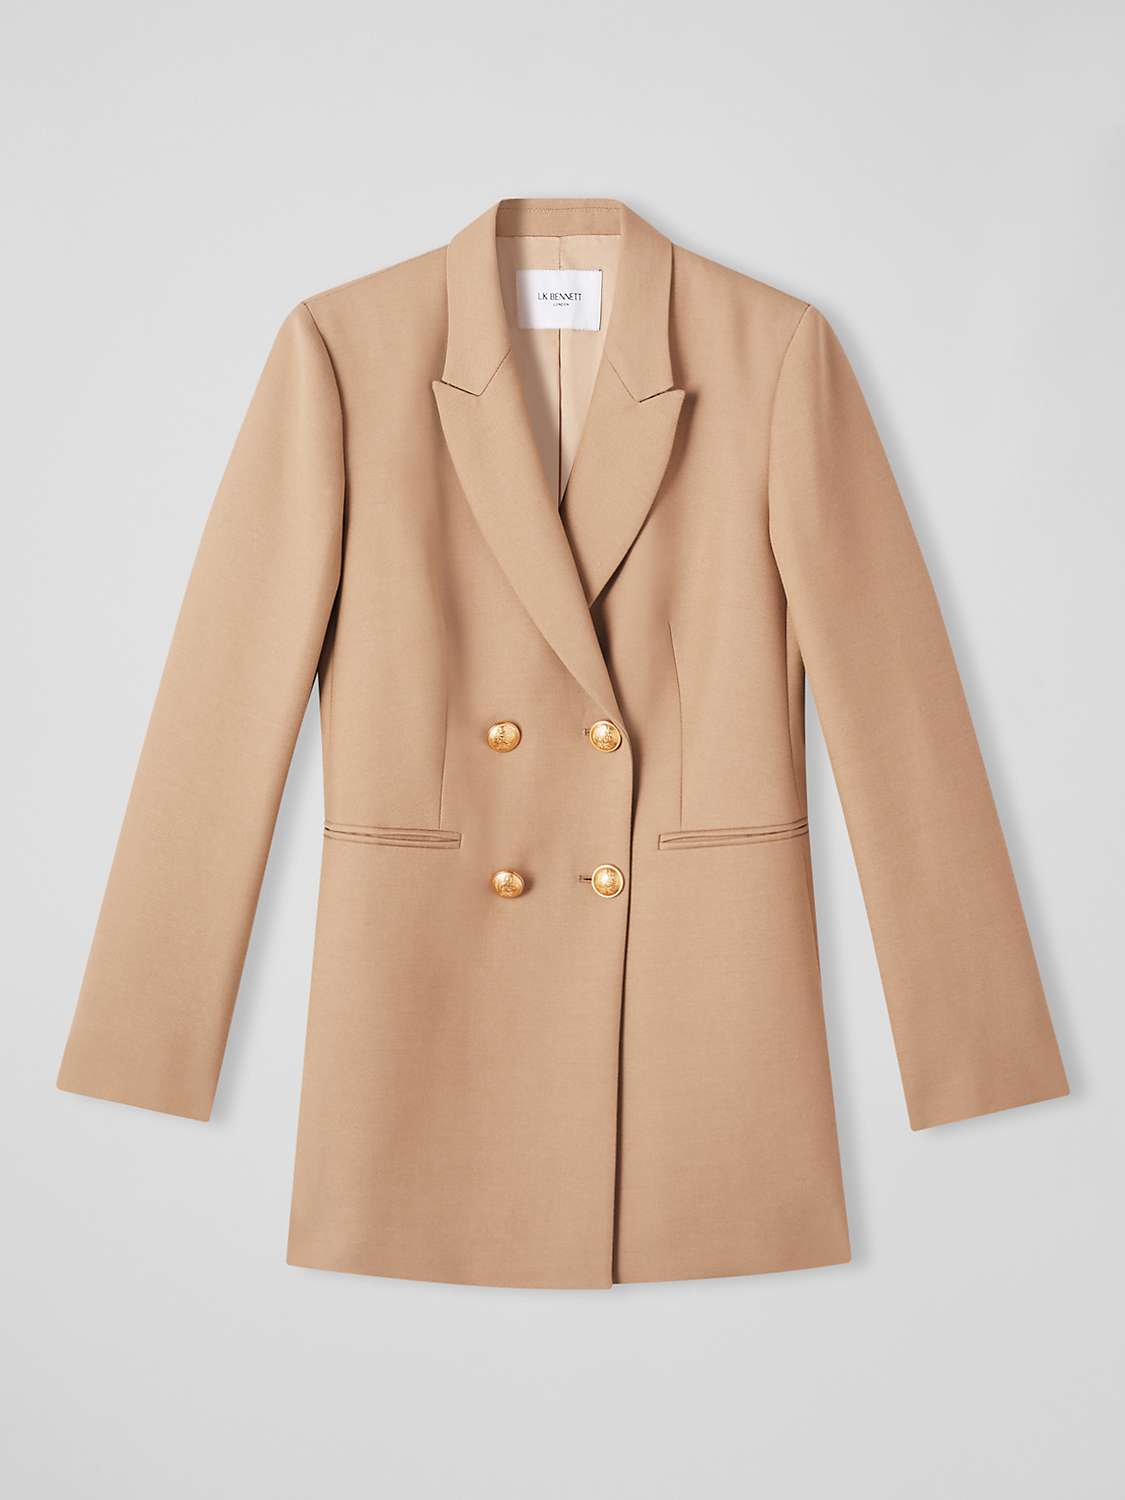 Buy L.K.Bennett x Ascot Collection: Mariner Double Breasted Blazer Online at johnlewis.com